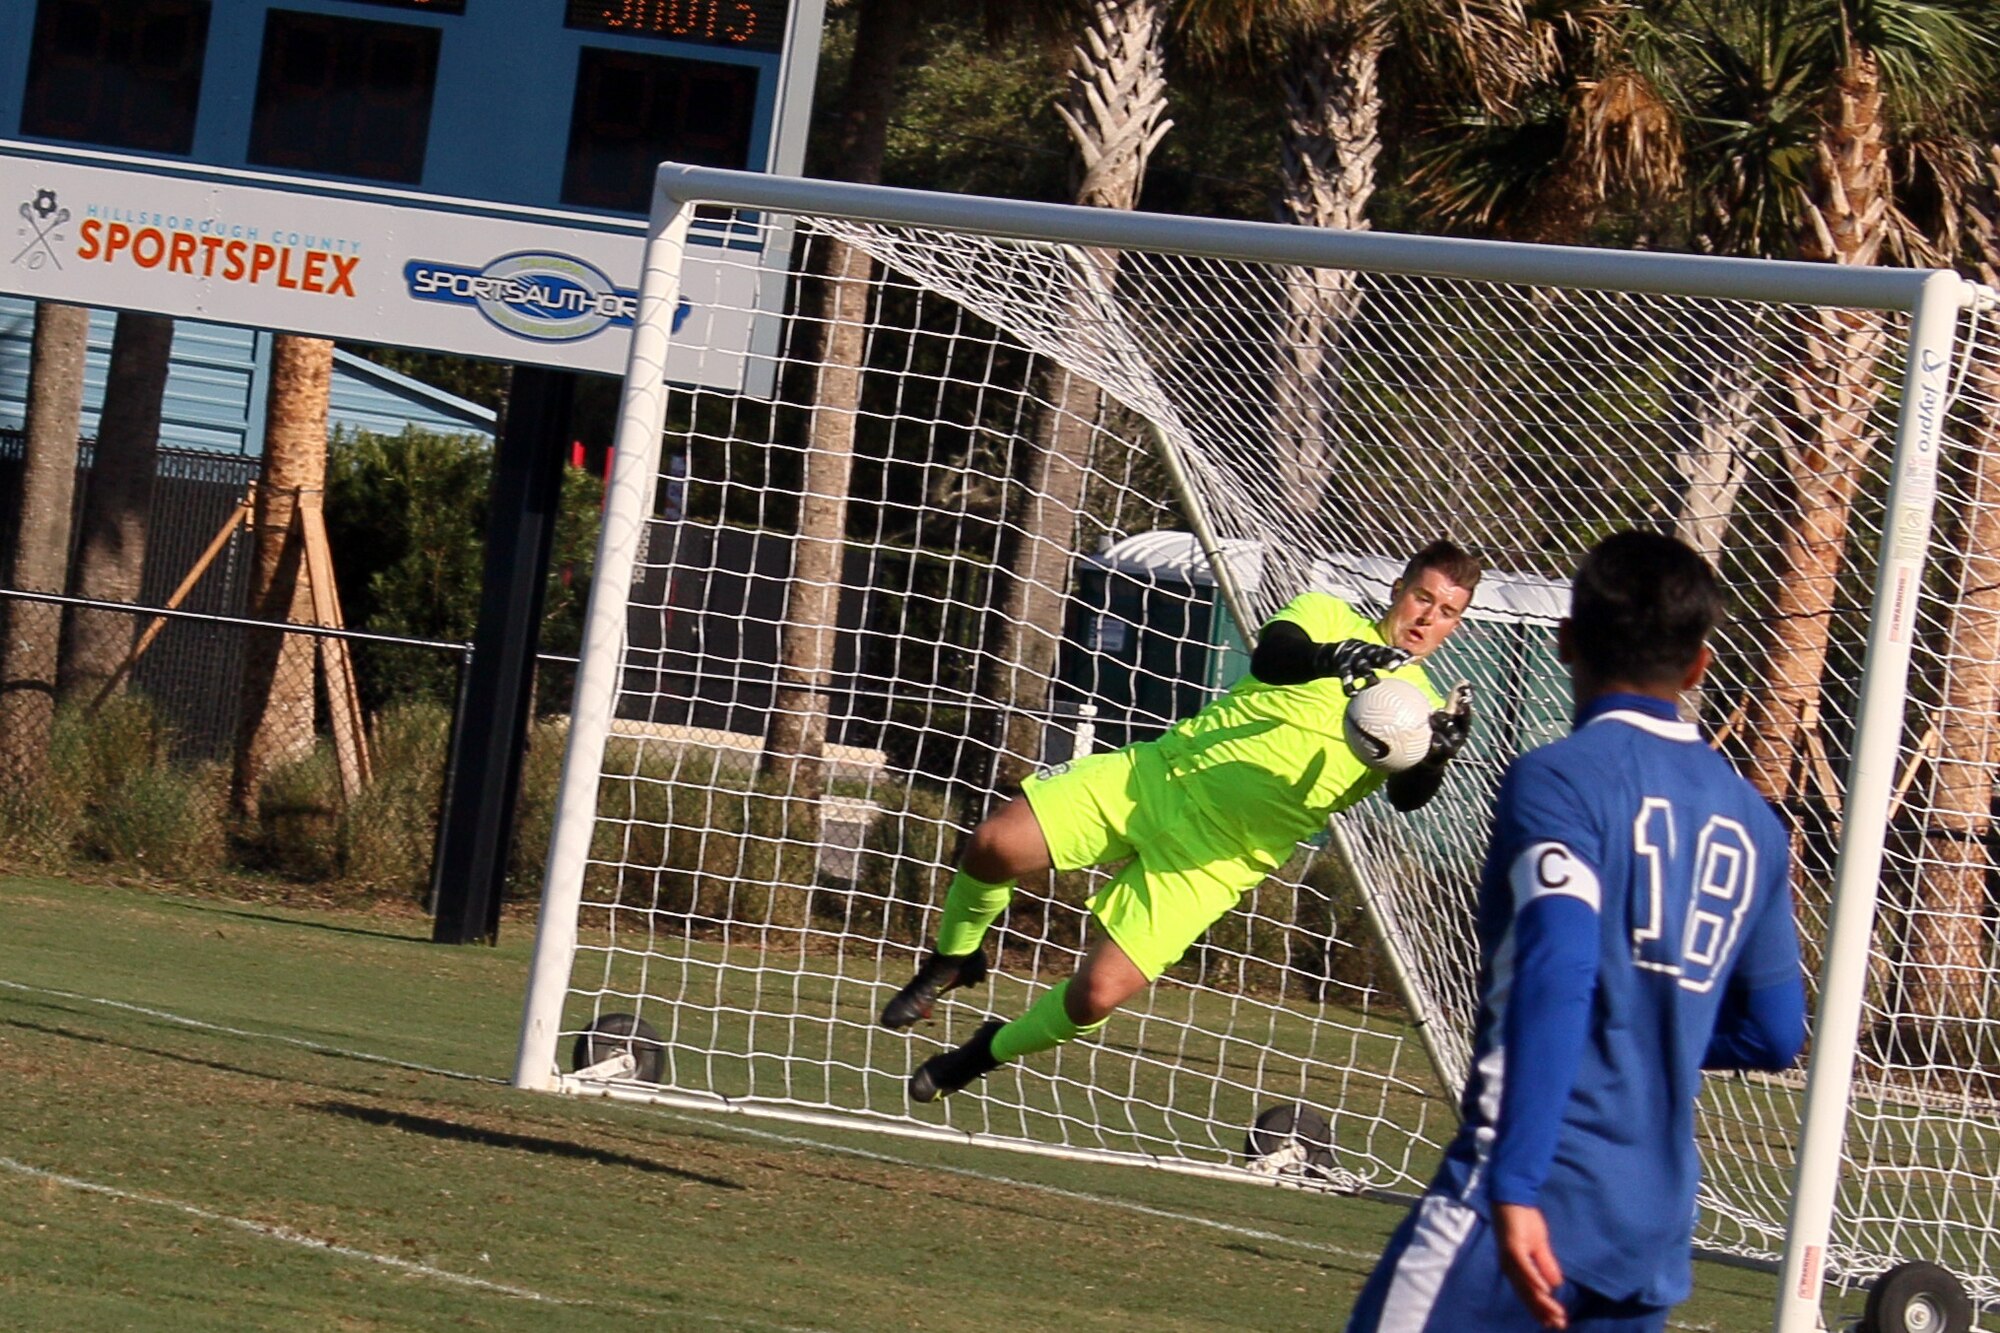 Air Force goalkeeper Senior Airman Gavin Bryant of Joint Base Langley-Eustis, Vir. dives for the save against Navy during the championship match of the 2022 Armed Forces Men’s Soccer Championship hosted by MacDill Air Force Base in Tampa, Florida from March 6-12.  The best players from the Army, Marine Corps, Navy and Air Force (with Space Force players) compete for gold.  (Photo by Ms. Arianna Dinote, Department of Defense Photo - Released)